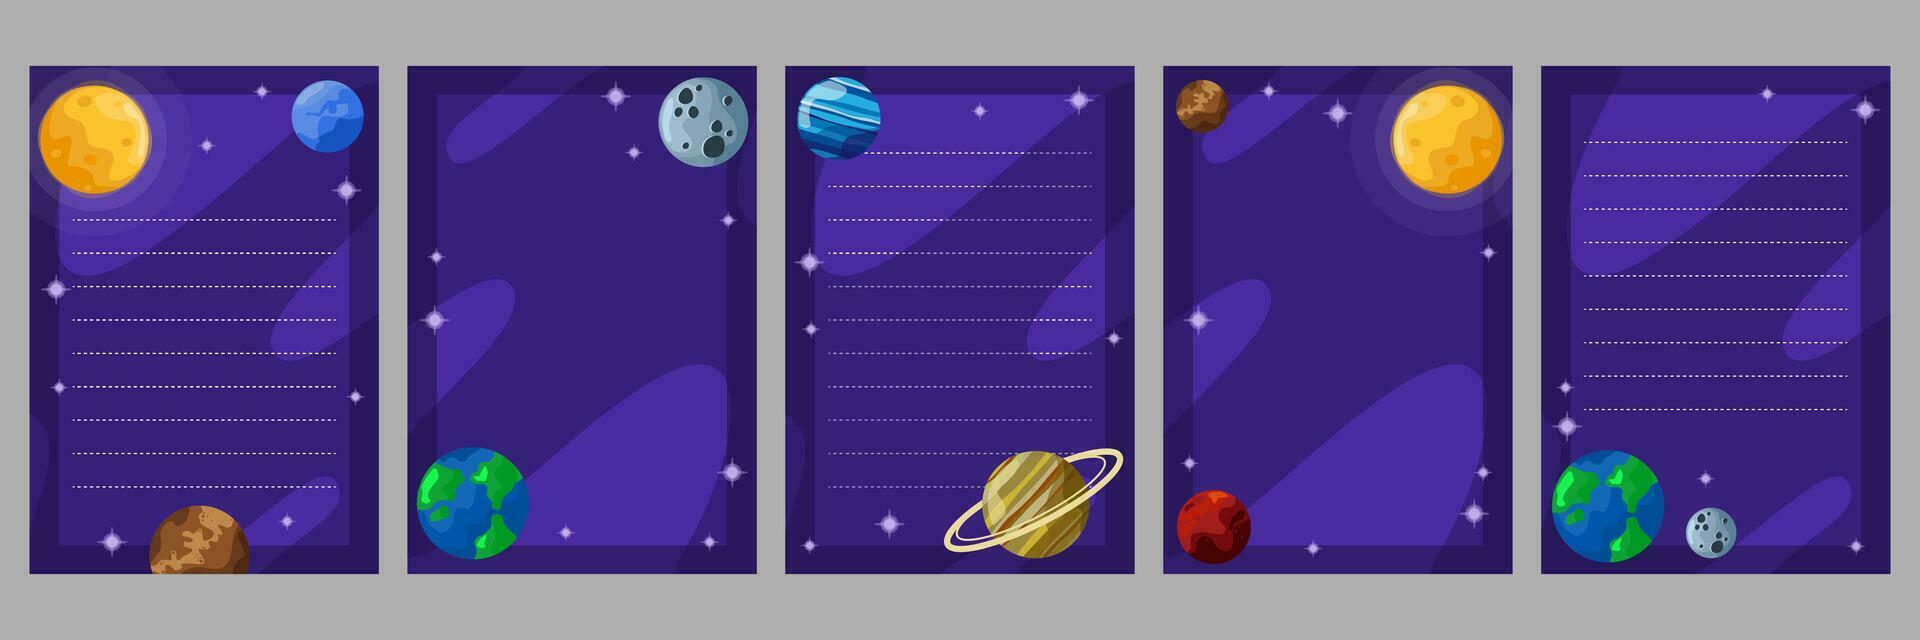 Vertical sheets for space-style notes. Outer space and planets. Design of postcards for decoration, notes, planning, invitations and notes vector